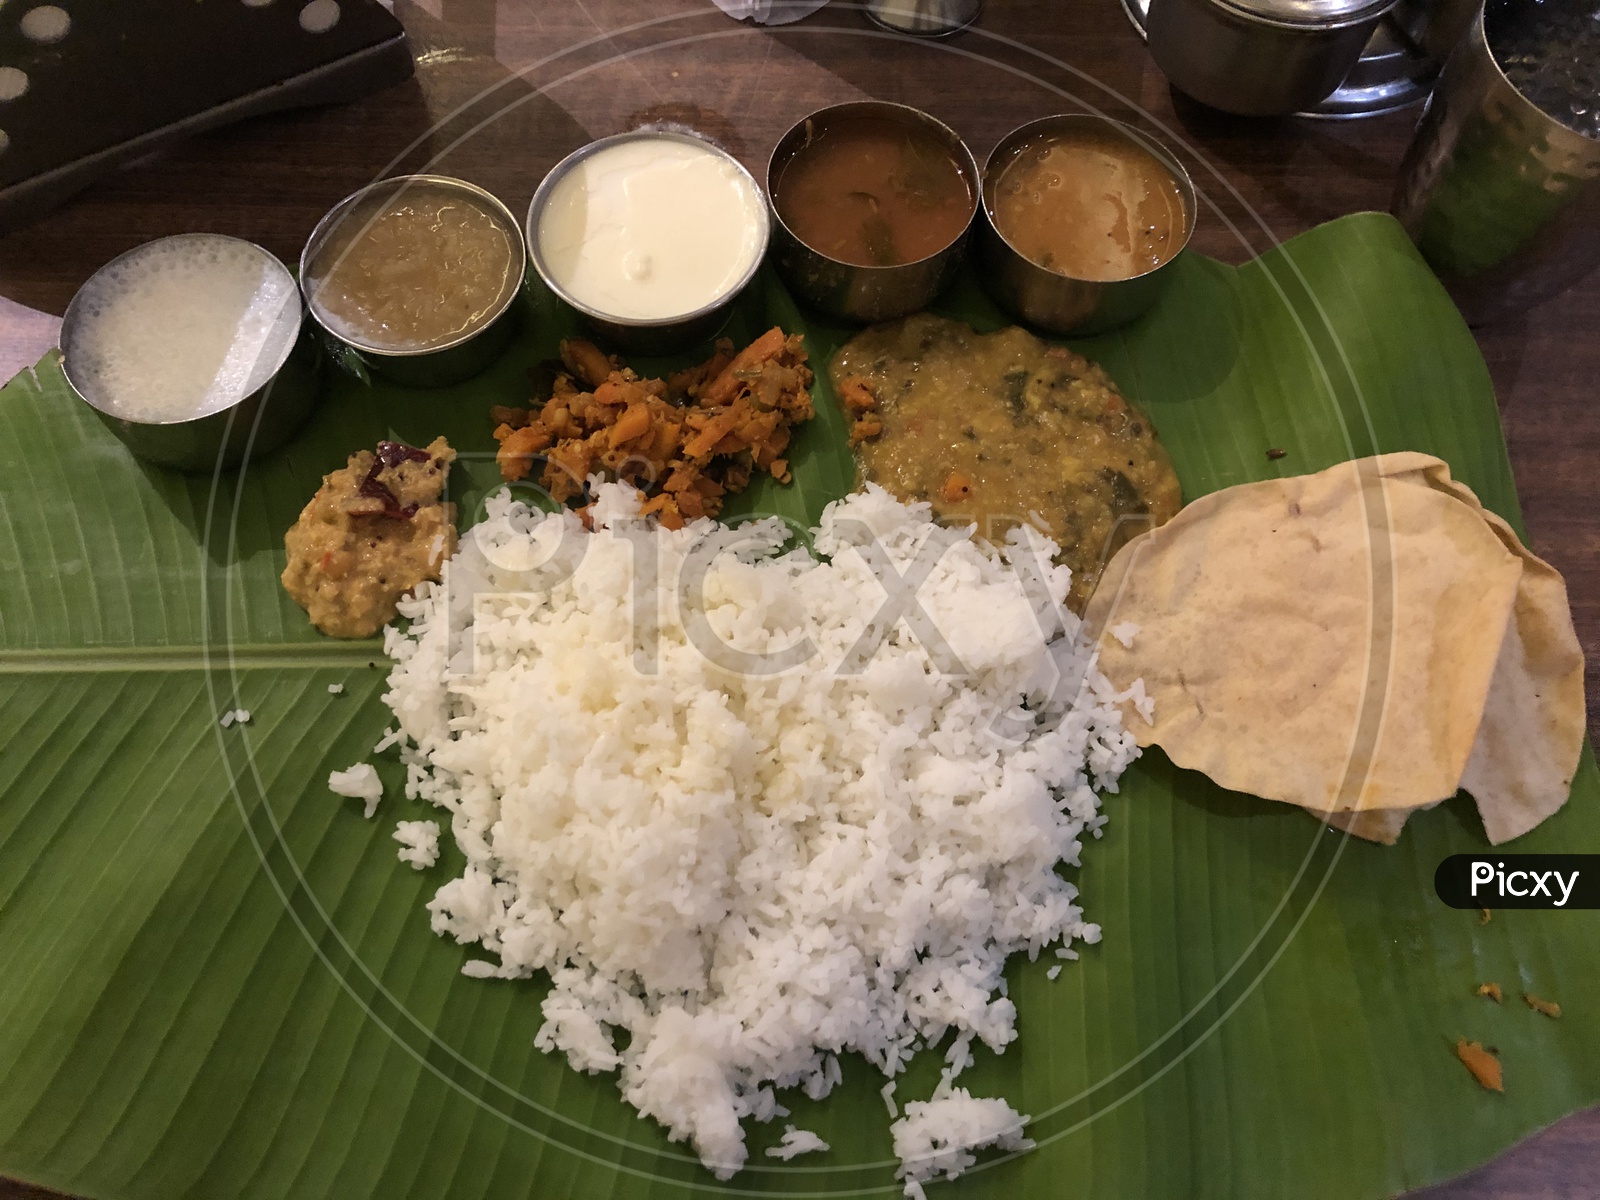 Banana leaf Lunch In Traditional Andhra Style Meals Served  At a Restaurant